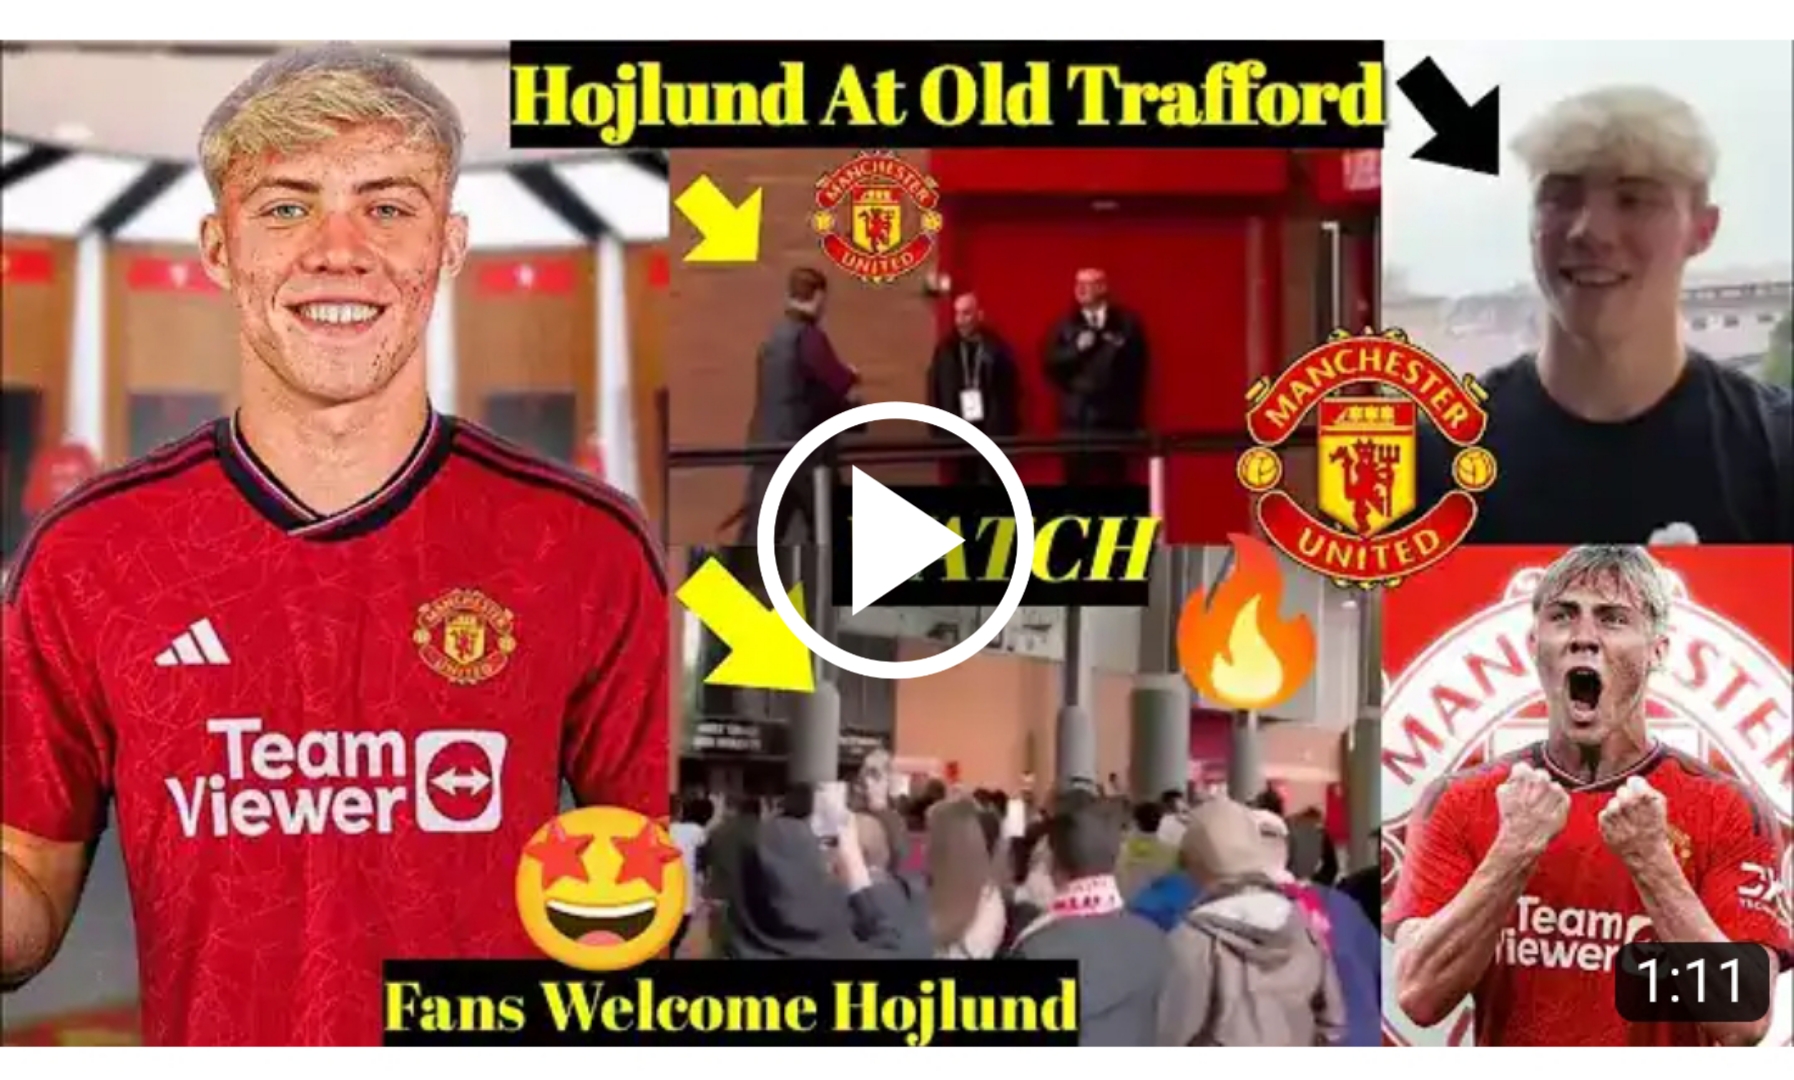 Rasmus Hojlund to Man UTD: The 72 million deal is finalized, medicals are set, and an announcement will be made shortly. The superstar is eager to join the team for preseason